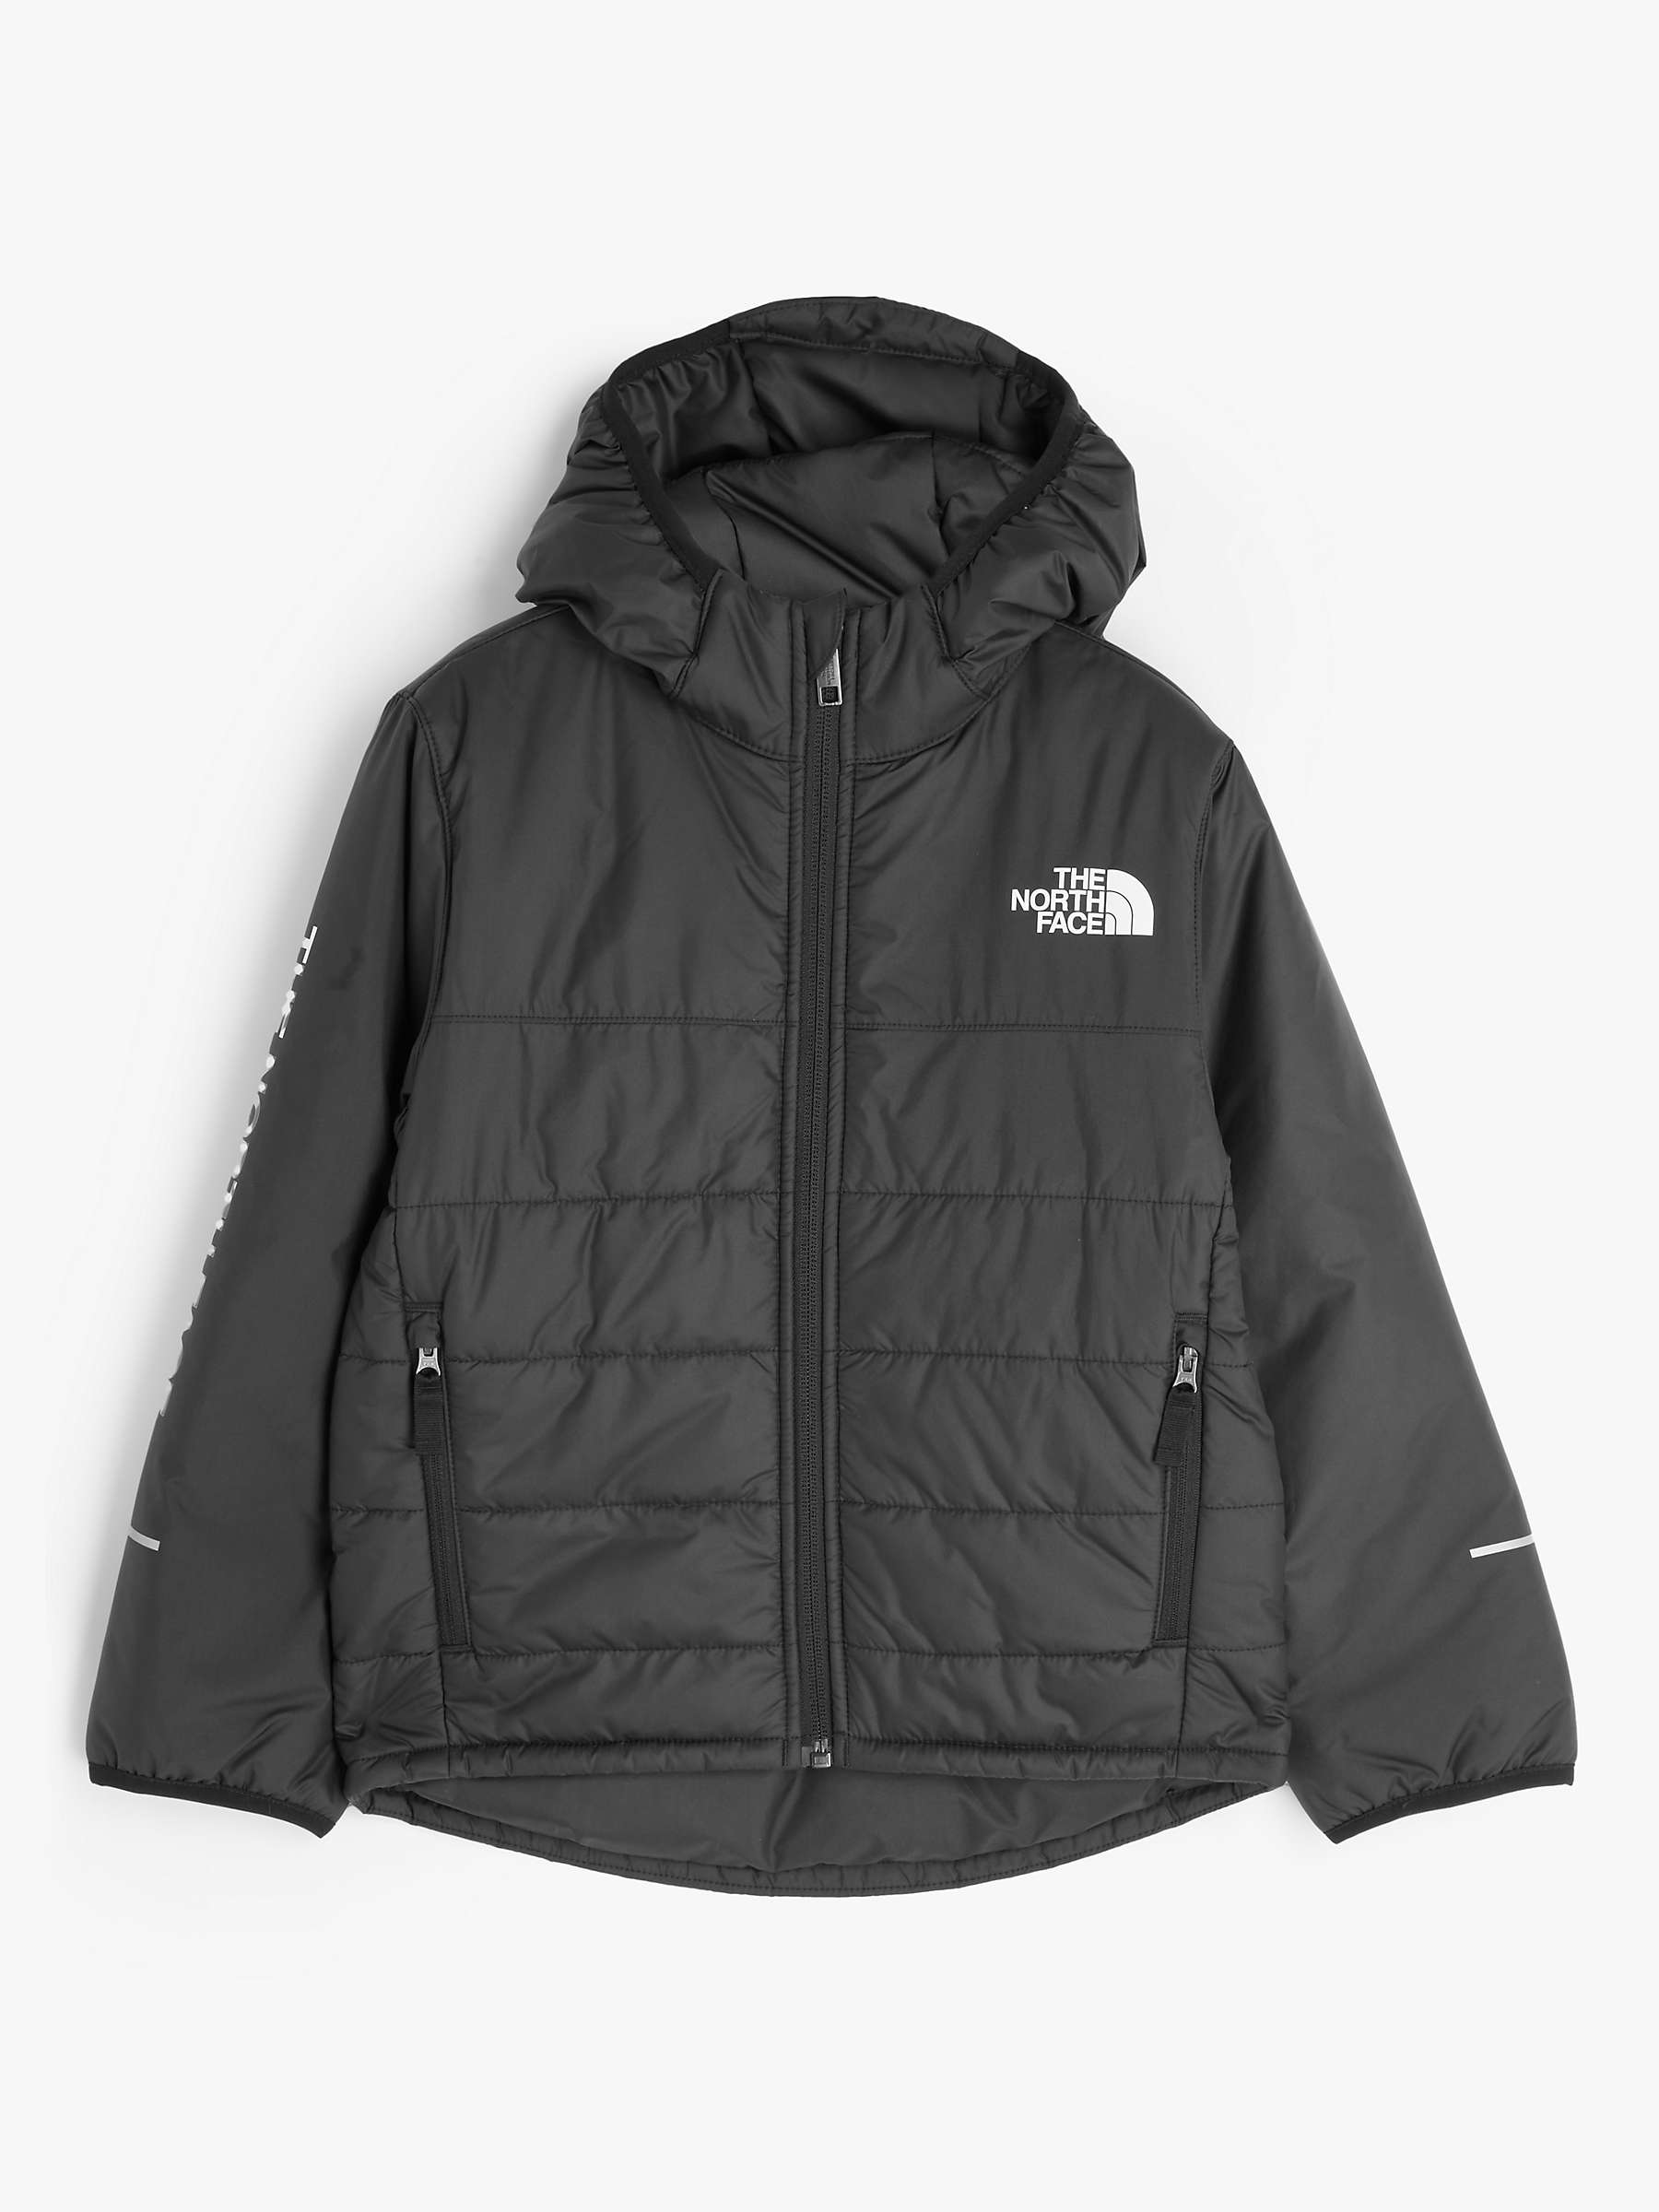 The North Face Kids' Never Stop Insulated Jacket, Black at John Lewis   Partners